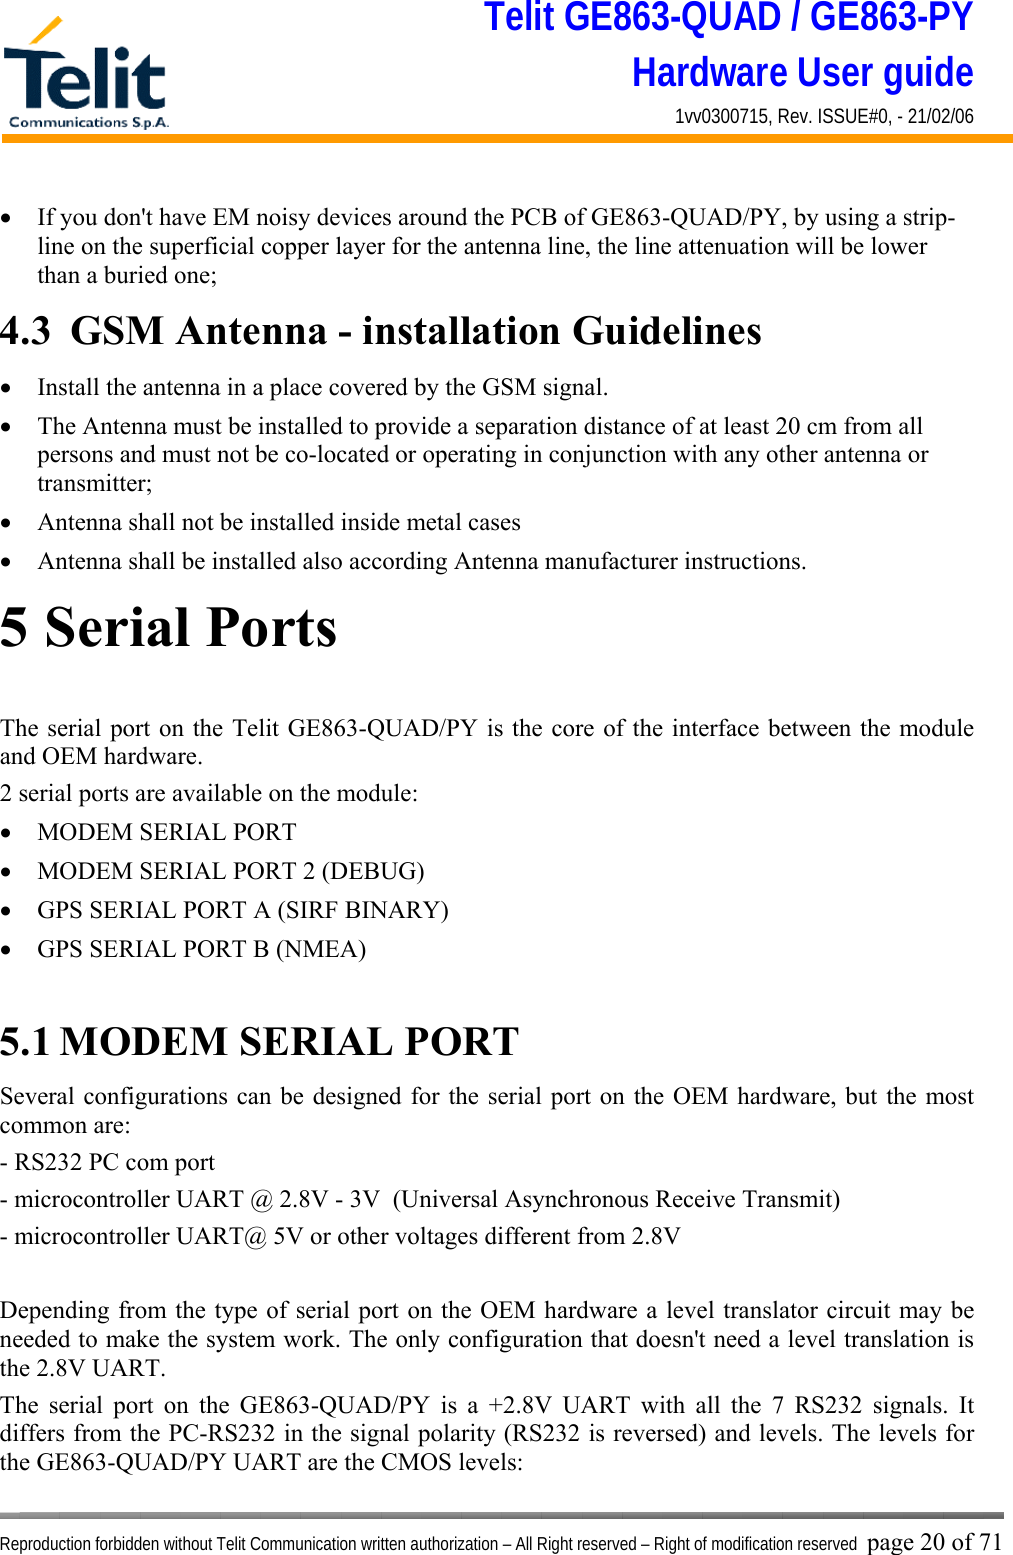 Telit GE863-QUAD / GE863-PY Hardware User guide 1vv0300715, Rev. ISSUE#0, - 21/02/06    Reproduction forbidden without Telit Communication written authorization – All Right reserved – Right of modification reserved page 20 of 71 •  If you don&apos;t have EM noisy devices around the PCB of GE863-QUAD/PY, by using a strip-line on the superficial copper layer for the antenna line, the line attenuation will be lower than a buried one; 4.3  GSM Antenna - installation Guidelines •  Install the antenna in a place covered by the GSM signal. •  The Antenna must be installed to provide a separation distance of at least 20 cm from all persons and must not be co-located or operating in conjunction with any other antenna or transmitter; •  Antenna shall not be installed inside metal cases  •  Antenna shall be installed also according Antenna manufacturer instructions. 5 Serial Ports The serial port on the Telit GE863-QUAD/PY is the core of the interface between the module and OEM hardware.  2 serial ports are available on the module: •  MODEM SERIAL PORT •  MODEM SERIAL PORT 2 (DEBUG) •  GPS SERIAL PORT A (SIRF BINARY) •  GPS SERIAL PORT B (NMEA)  5.1 MODEM SERIAL PORT Several configurations can be designed for the serial port on the OEM hardware, but the most common are: - RS232 PC com port - microcontroller UART @ 2.8V - 3V  (Universal Asynchronous Receive Transmit)  - microcontroller UART@ 5V or other voltages different from 2.8V   Depending from the type of serial port on the OEM hardware a level translator circuit may be needed to make the system work. The only configuration that doesn&apos;t need a level translation is the 2.8V UART. The serial port on the GE863-QUAD/PY is a +2.8V UART with all the 7 RS232 signals. It differs from the PC-RS232 in the signal polarity (RS232 is reversed) and levels. The levels for the GE863-QUAD/PY UART are the CMOS levels: 